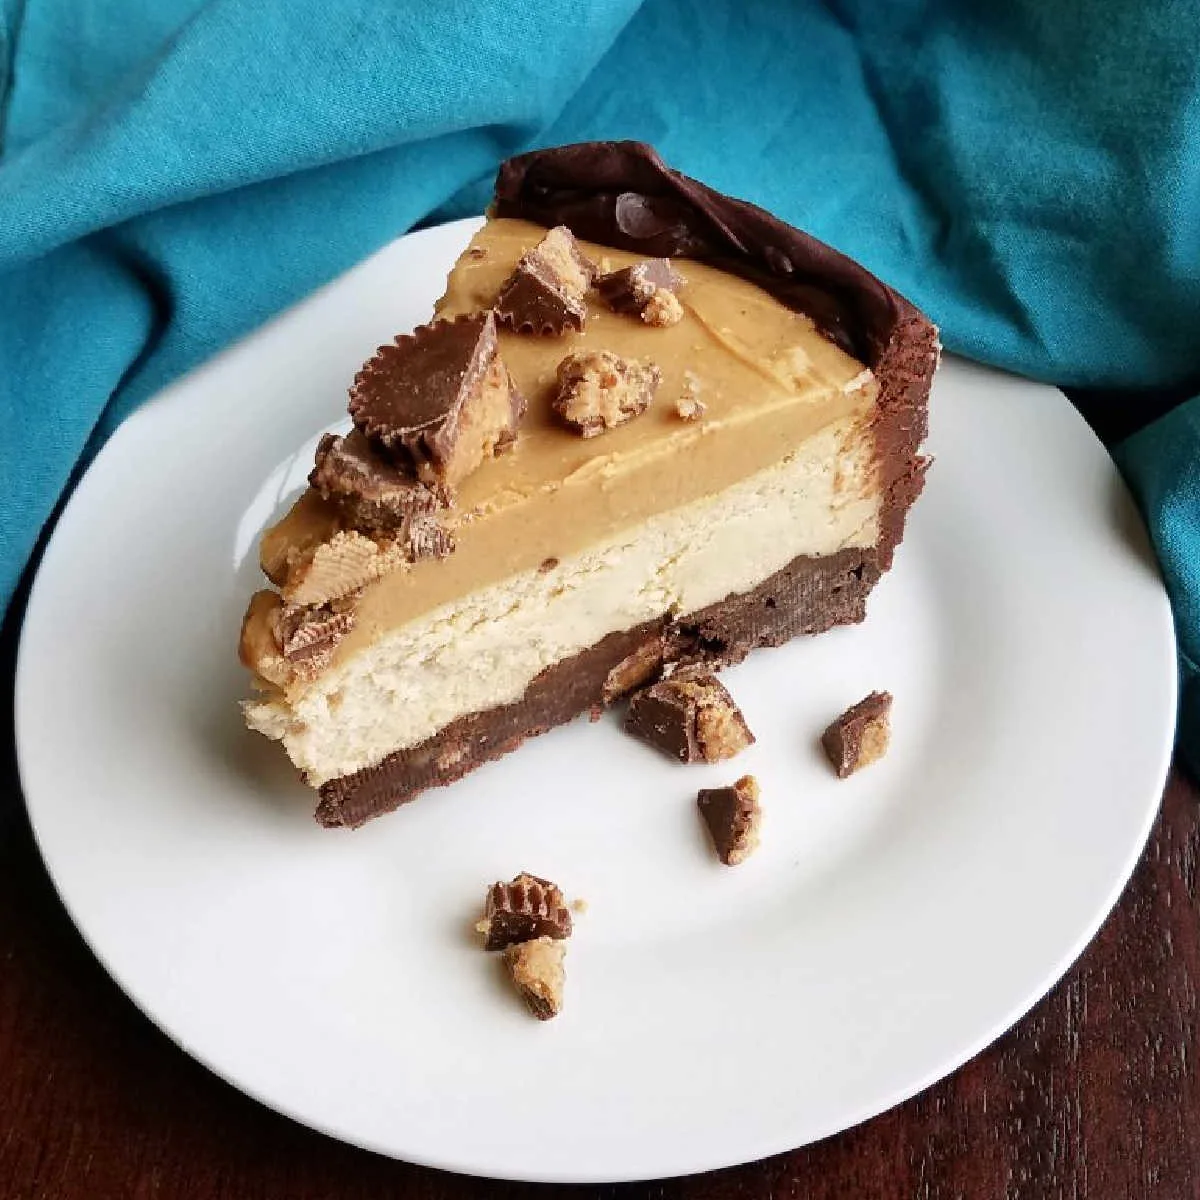 Layers of chocolate crust, creamy peanut butter cheesecake and rich peanut butter topping with chopped peanut butter cups on top.